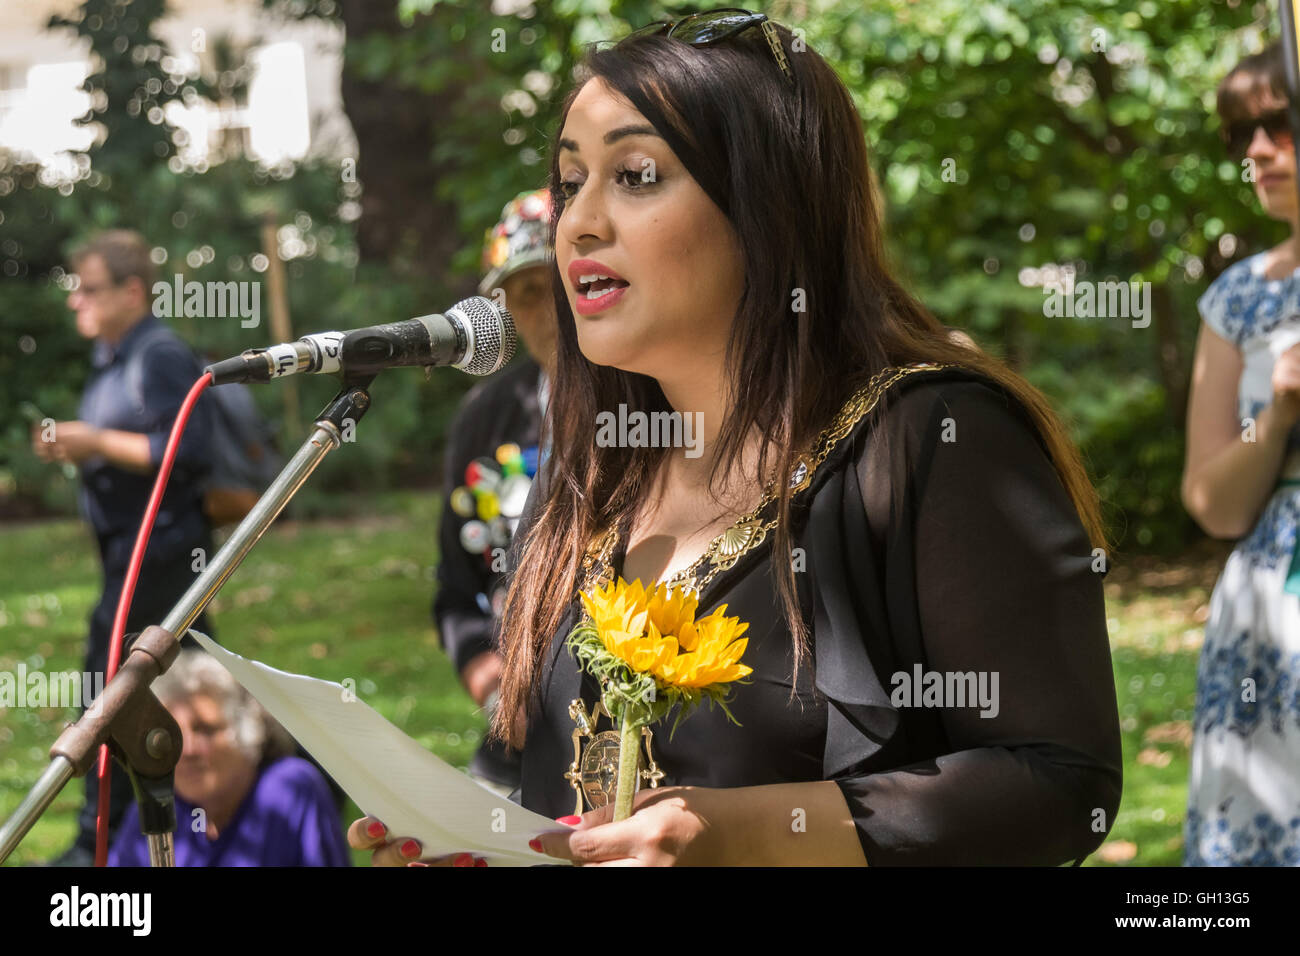 London, UK. 6th August 2016. Cllr Nadia Shah, Mayor of Camden, speaks at London CND  ceremony in memory of the victims, past and present on the 71st anniversary of the dropping of the atomic bomb on Hiroshima and the second atomic bomb dropped on Nagasaki three days later. After a number of speeches and performances there was a two minute's silence during which the Mayor of Camden and others laid flowers around the commemorative cherry tree. Peter Marshall/Alamy Live News Stock Photo